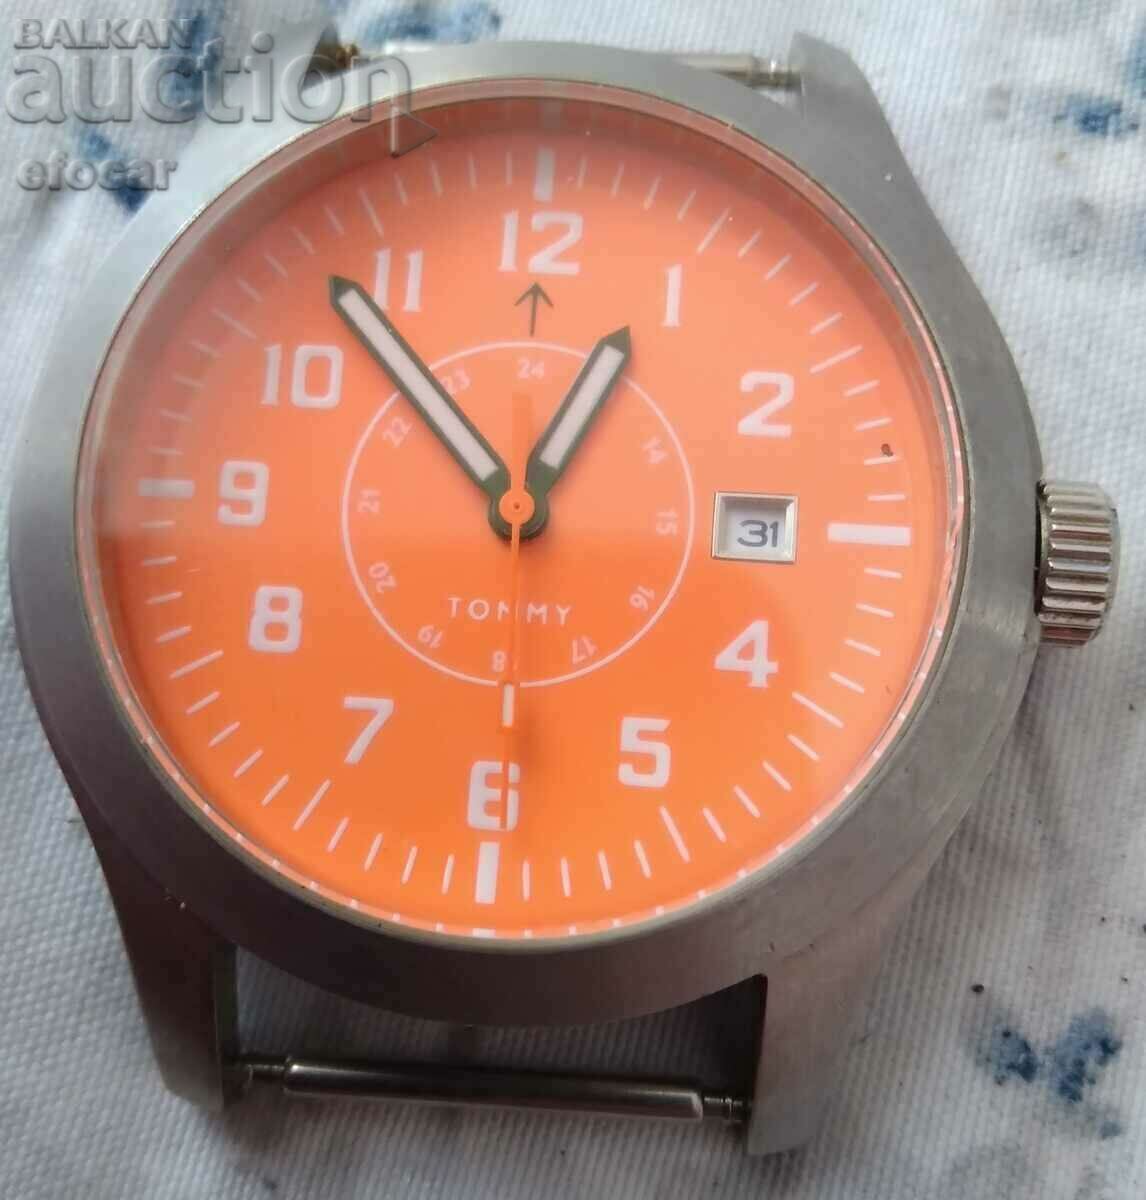 Tomy watch starting from 0.01st